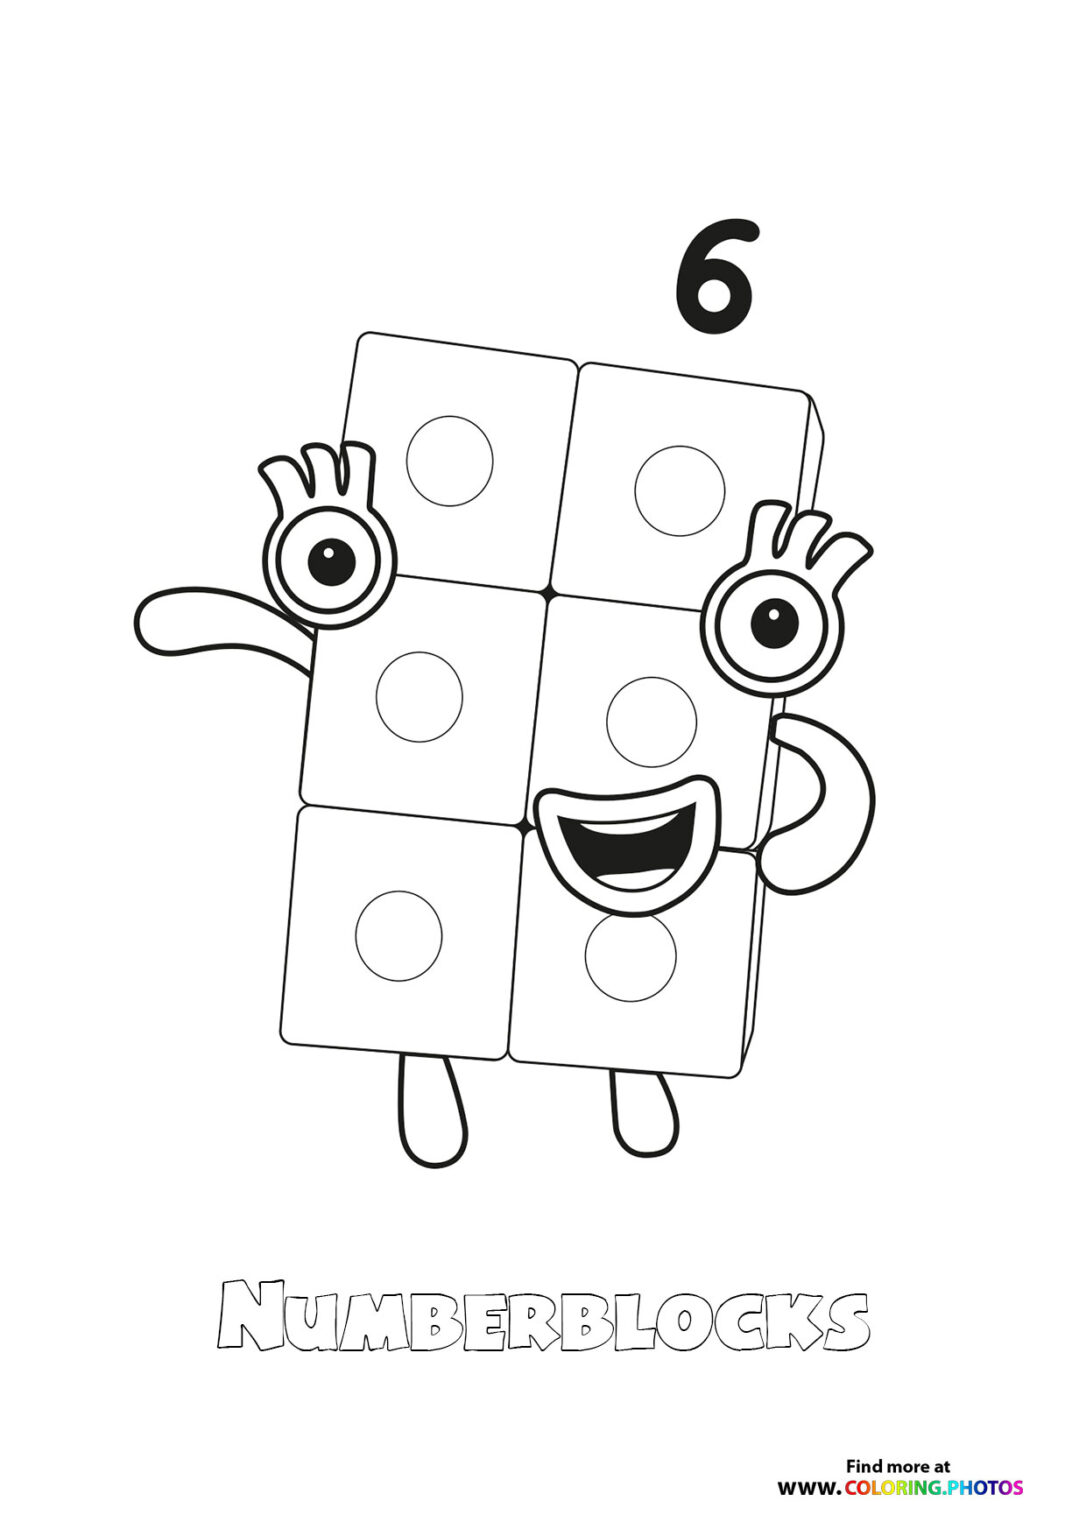 Number 6 Numberblocks - Coloring Pages for kids